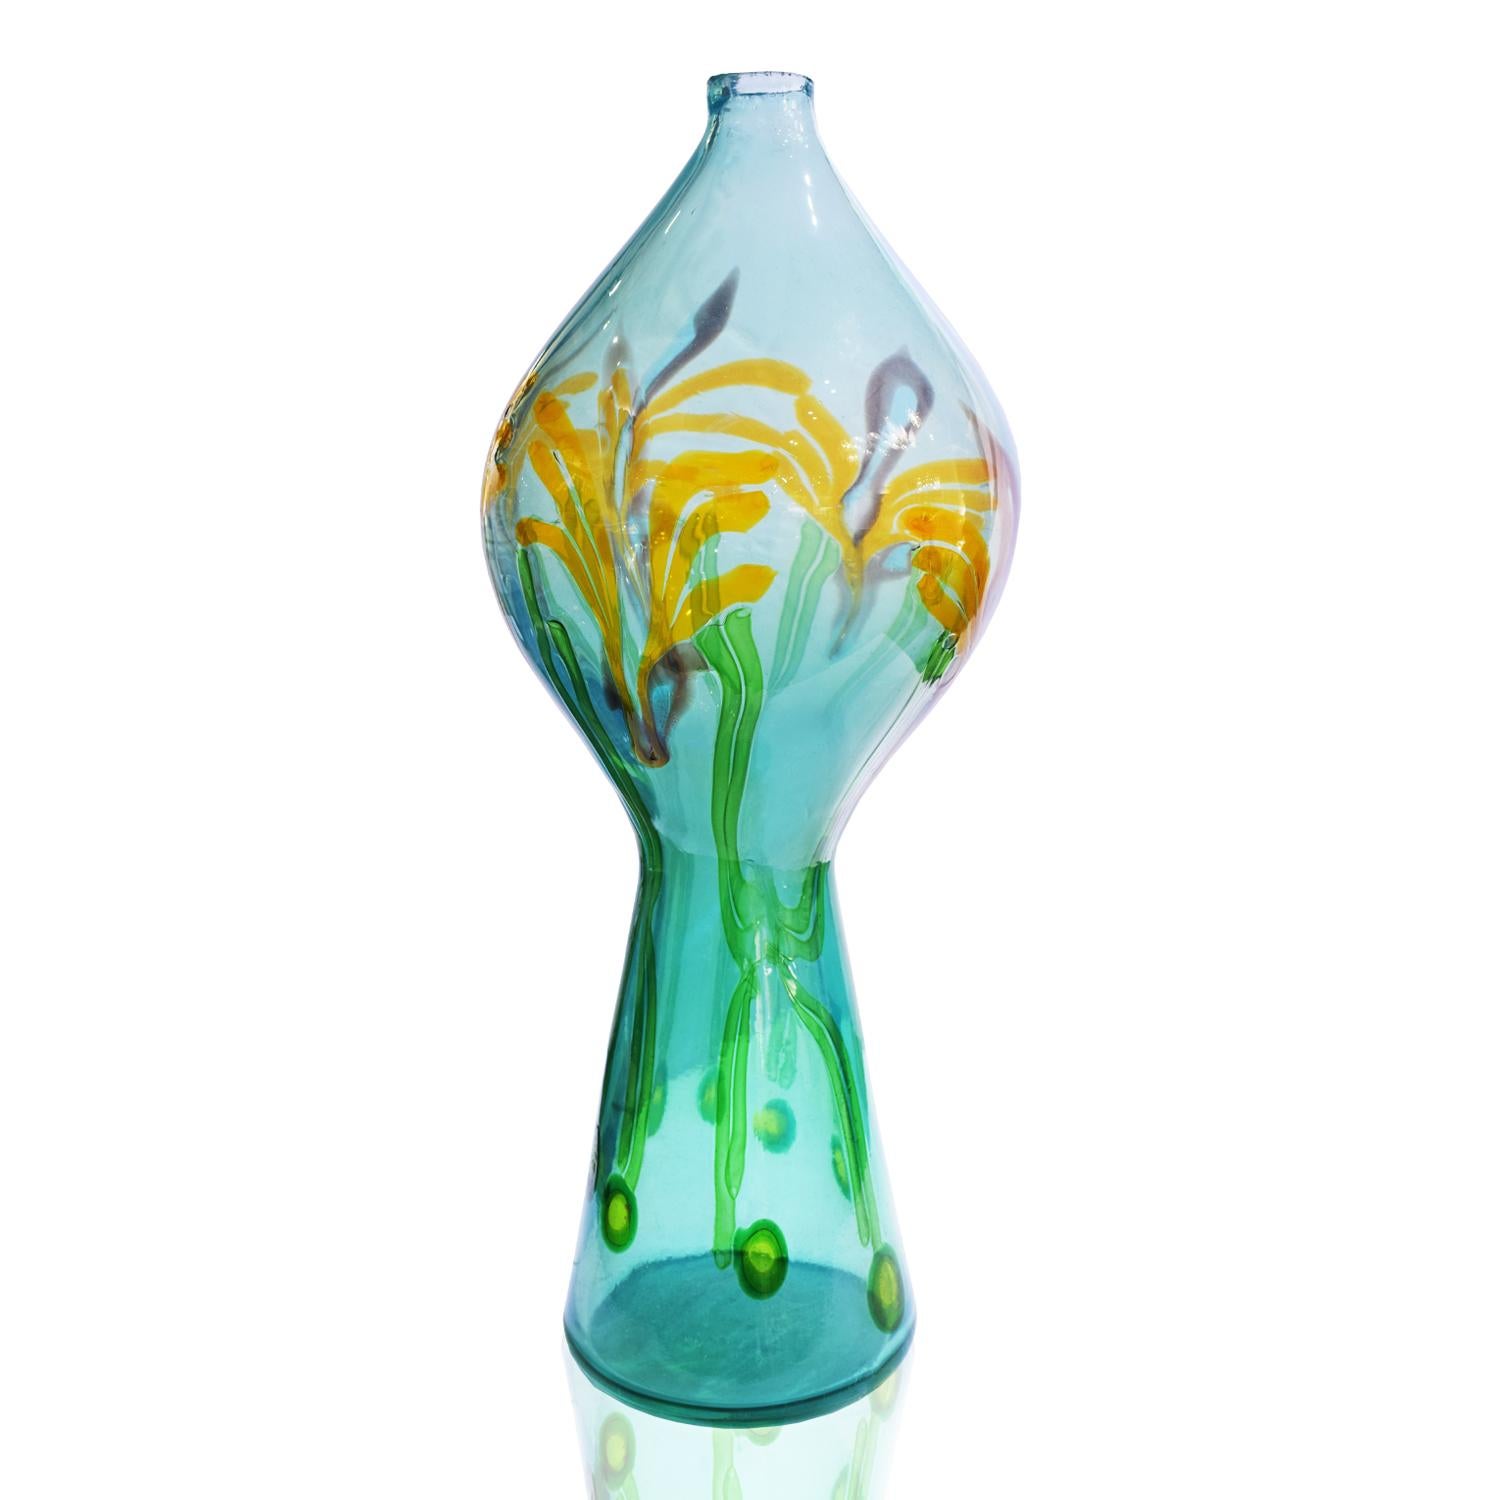 Hand blown glass masterpiece. Large and exceptional 